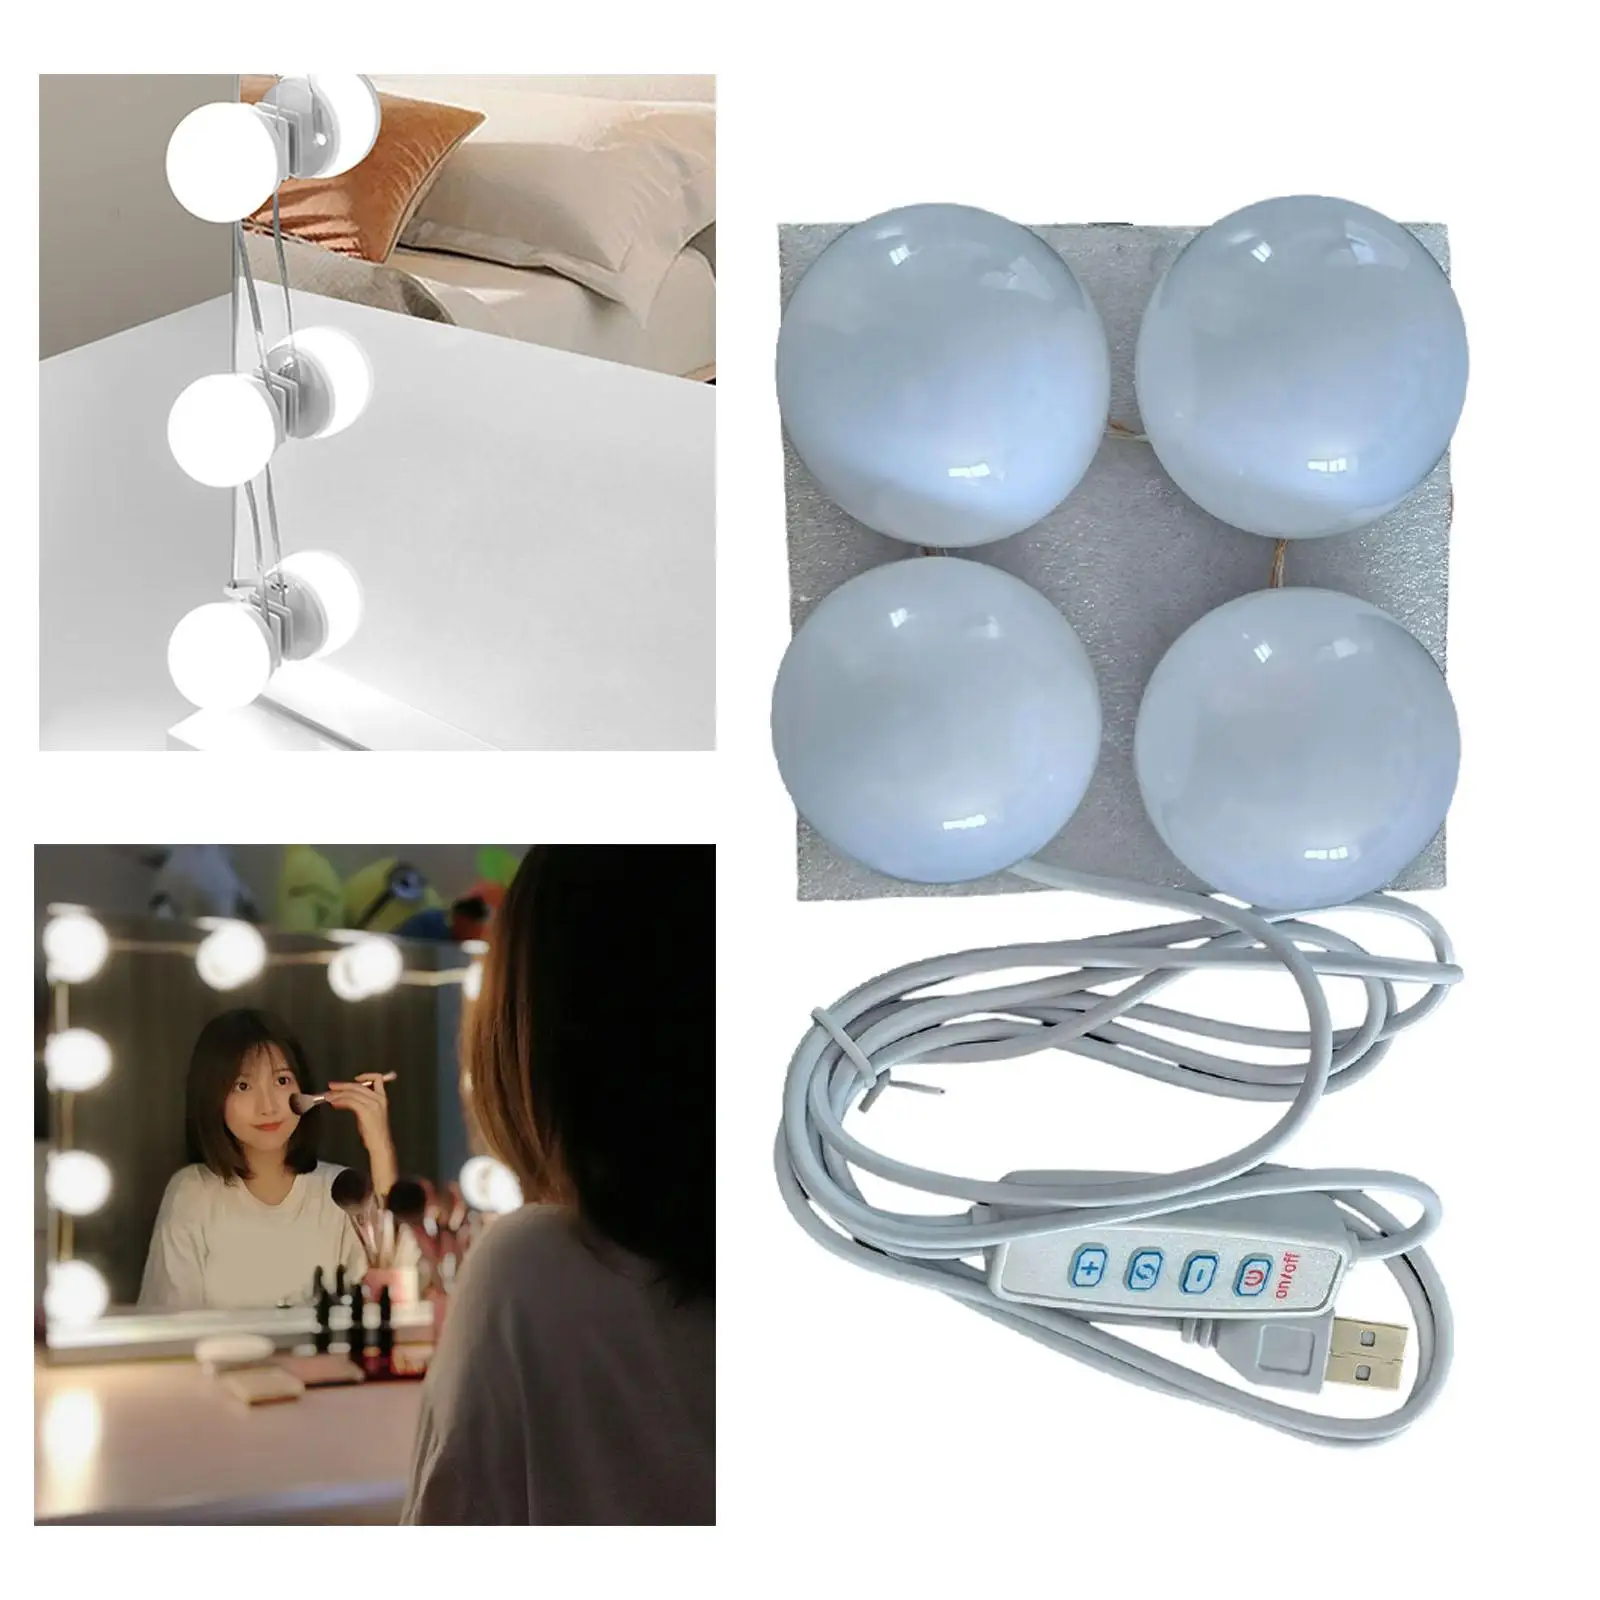 LED Makeup Mirror Lights Cosmetic mirror Colors Dimmable Bulbs Adjustable for Vanity Stick Home Improvement Bathroom Mirror